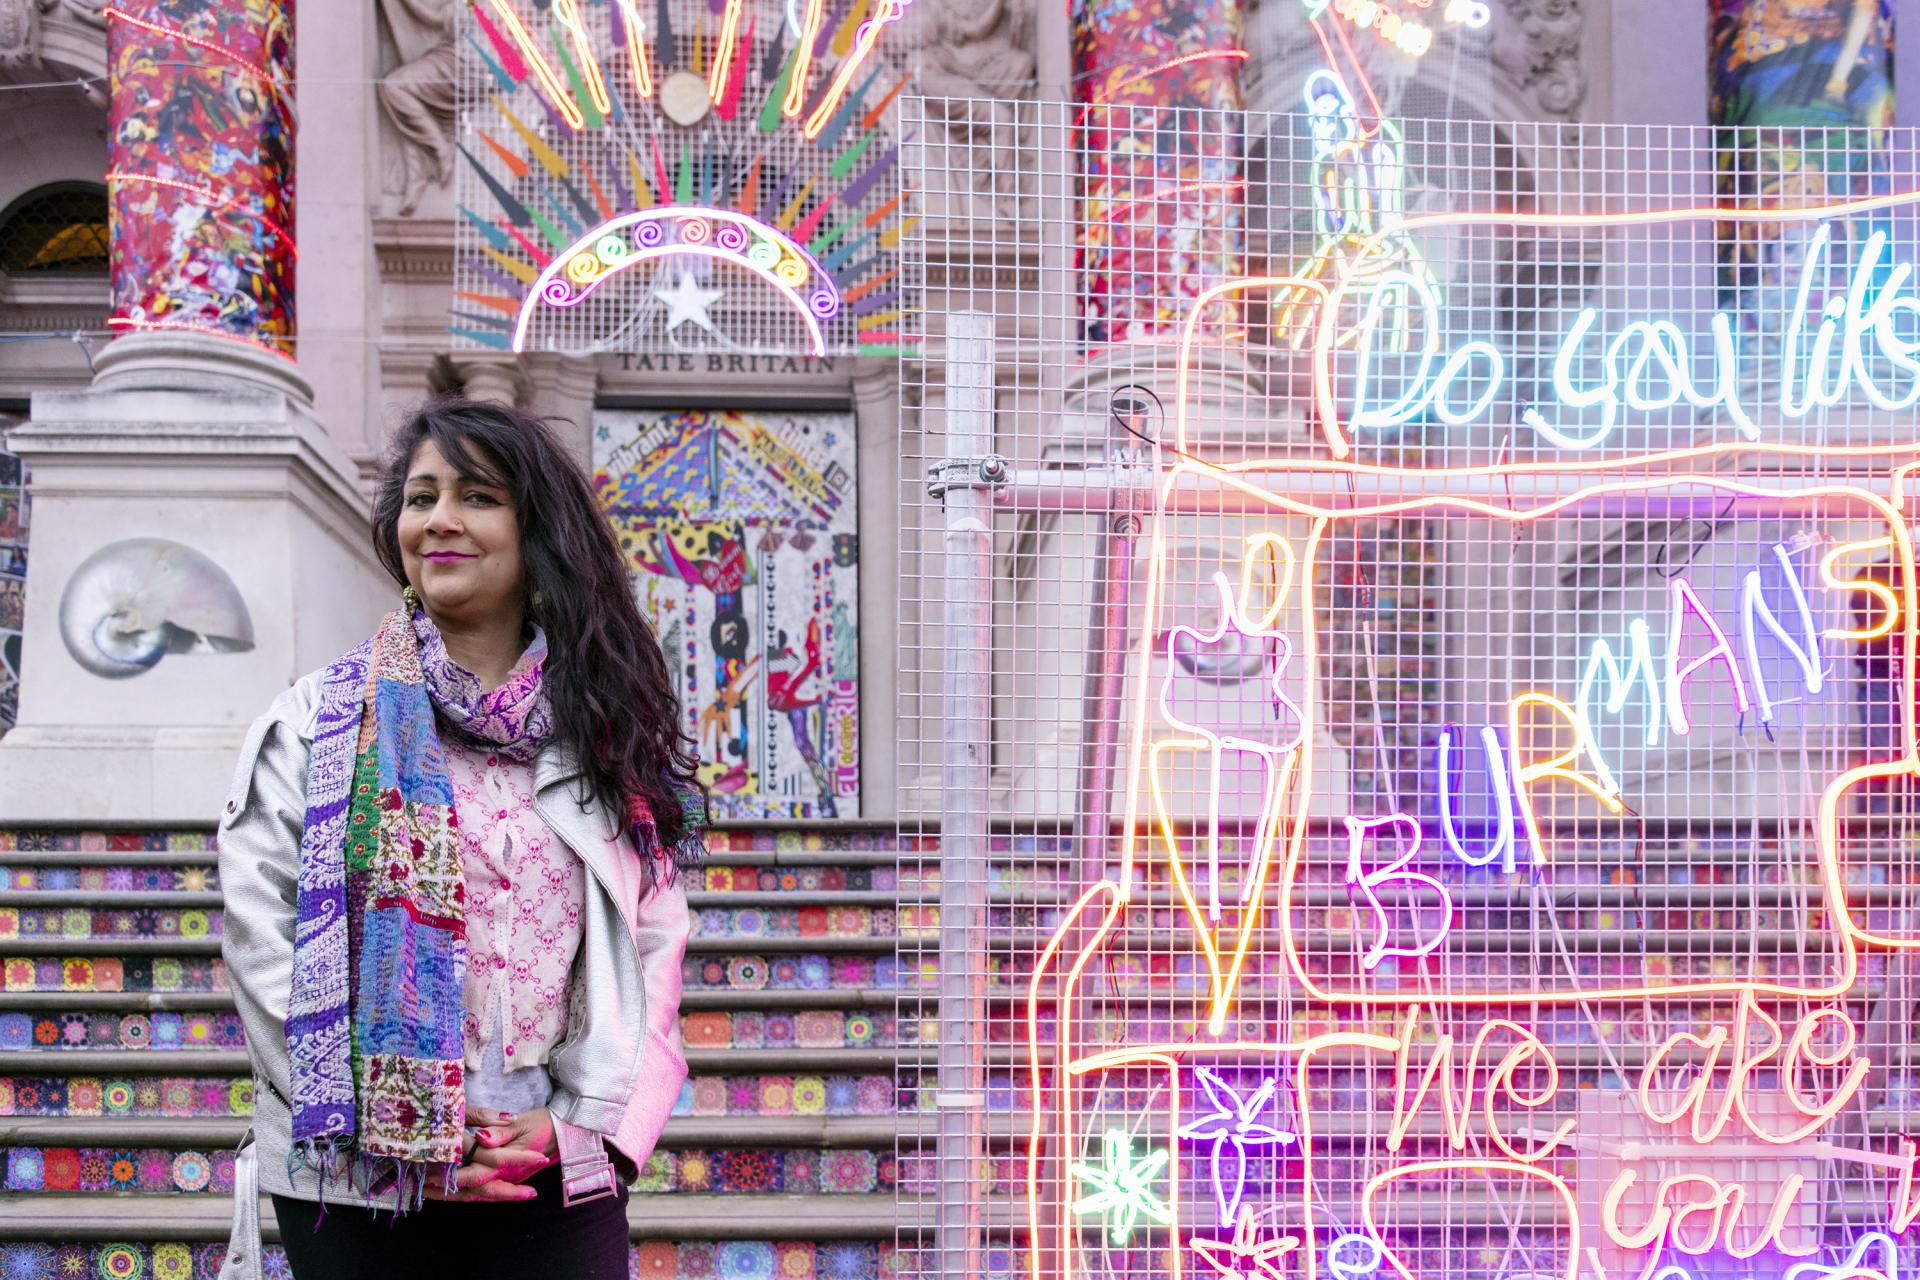 Feast For the Senses: Festive Neon Lights Up Tate Britain